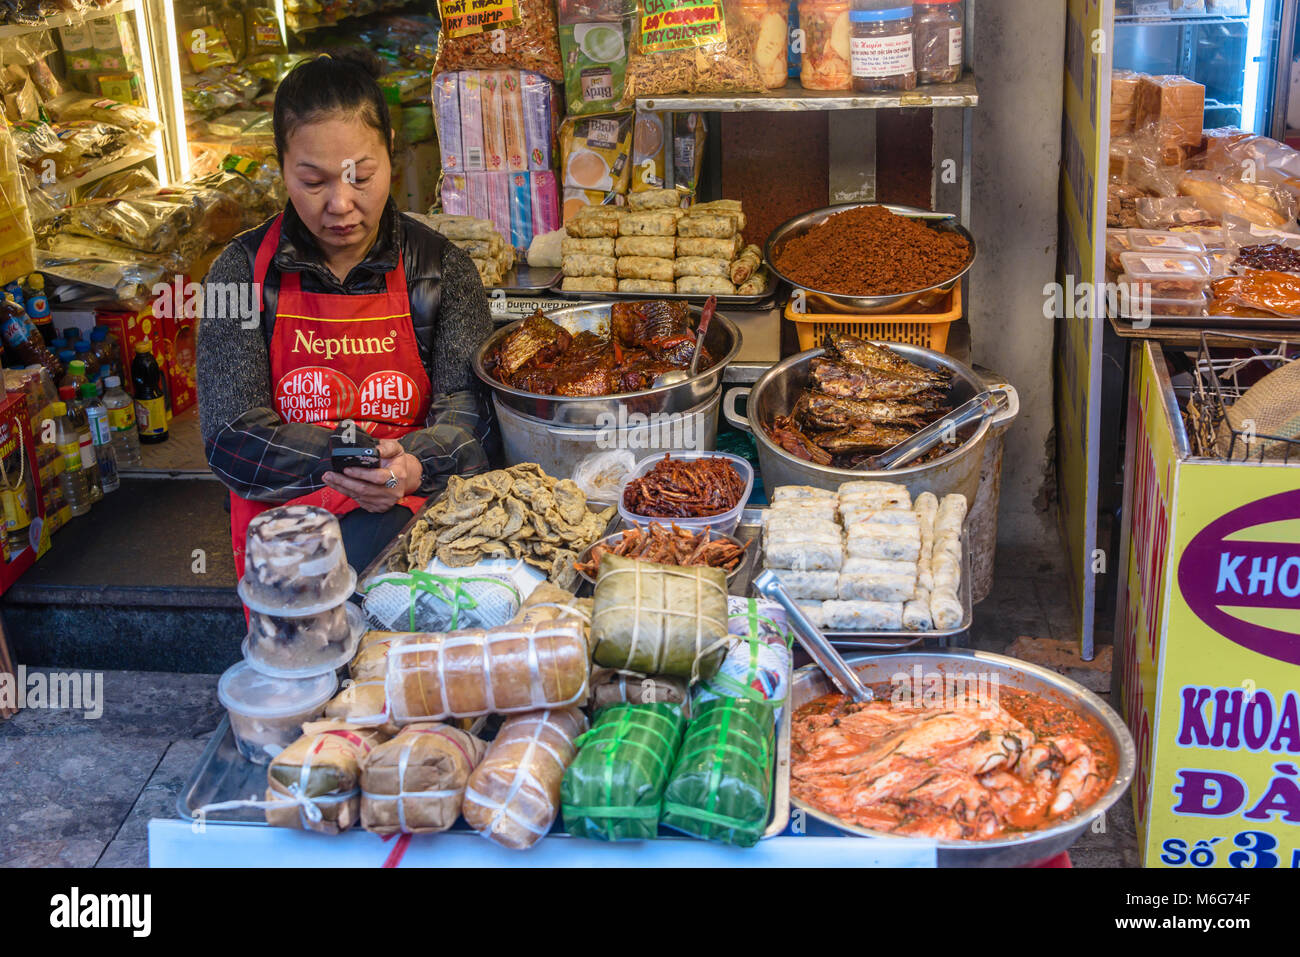 A woman looks at her Smartphone while waiting for customers to her street food stall on a footpath in Hanoi, Vietnam Stock Photo